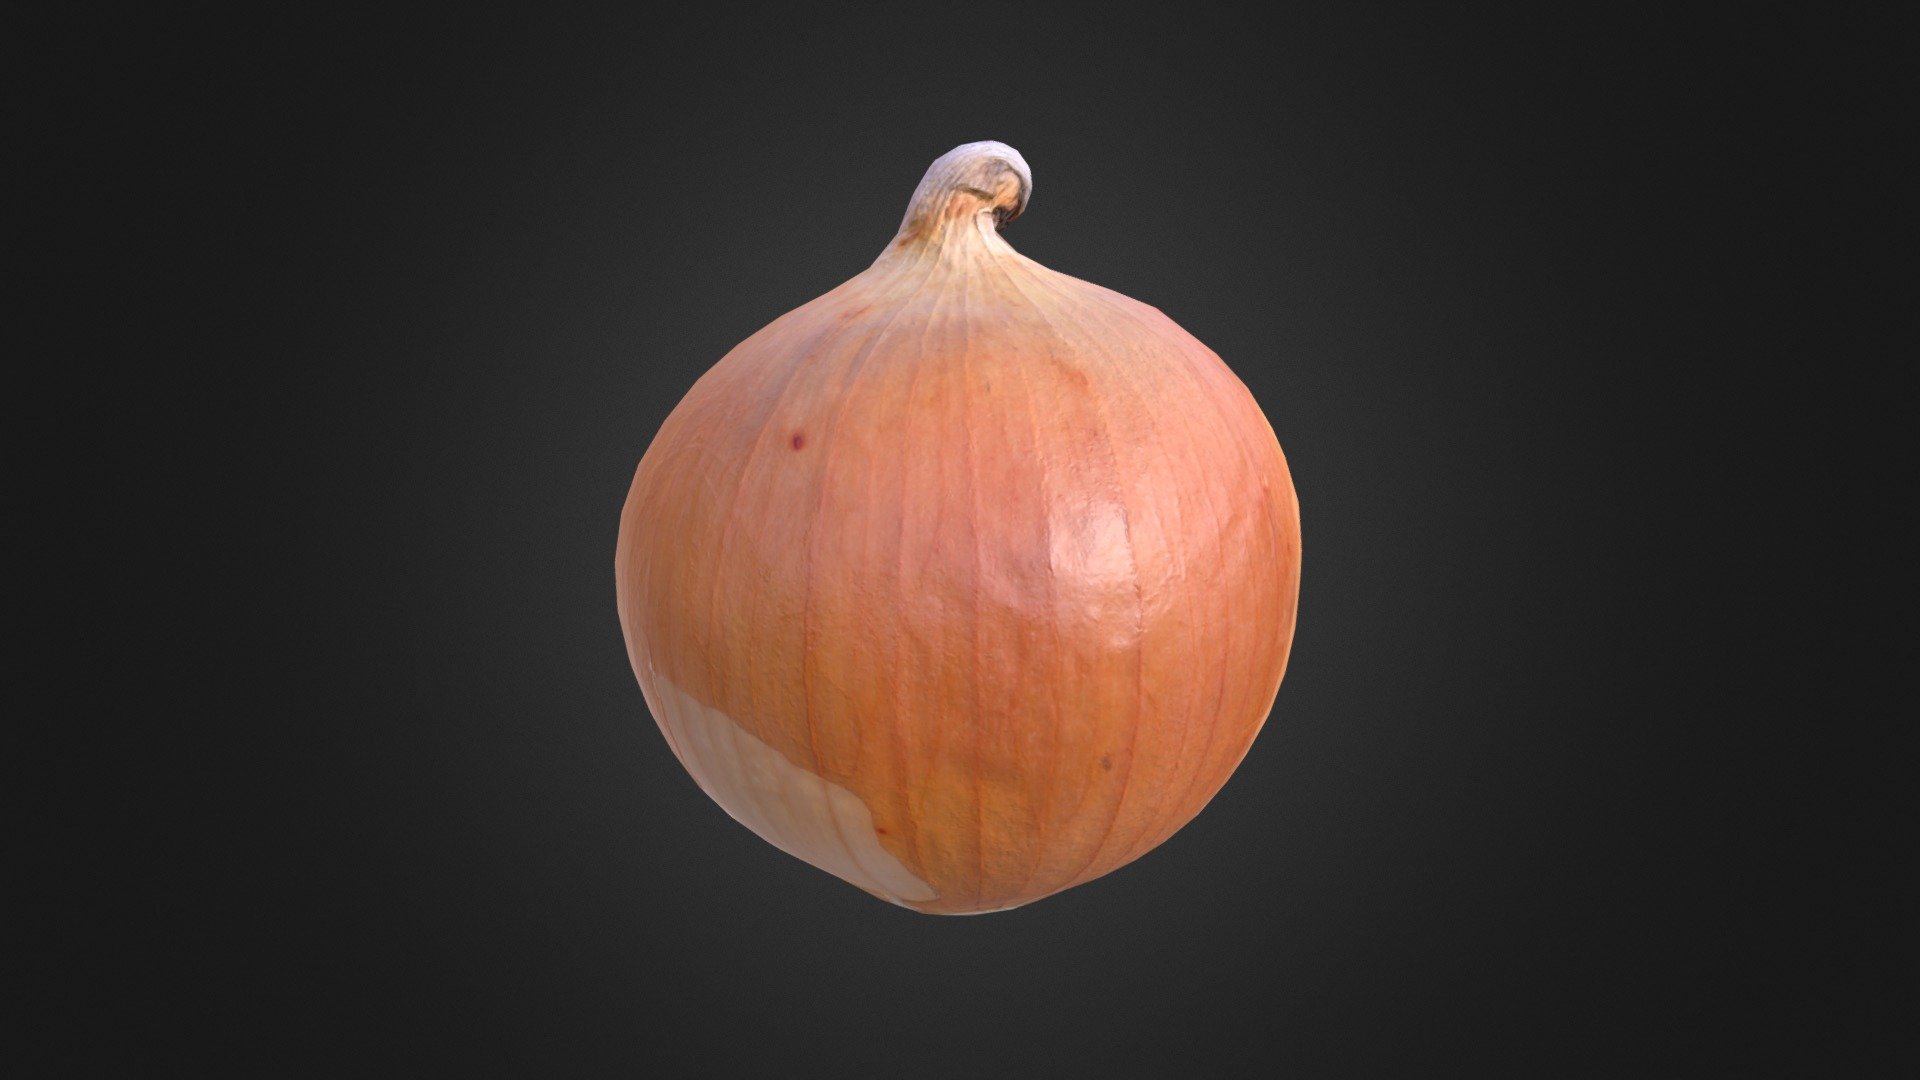 This onion model was created using photogrammetry - Onion - 3D model by Hiko (@hiko9lock) 3d model